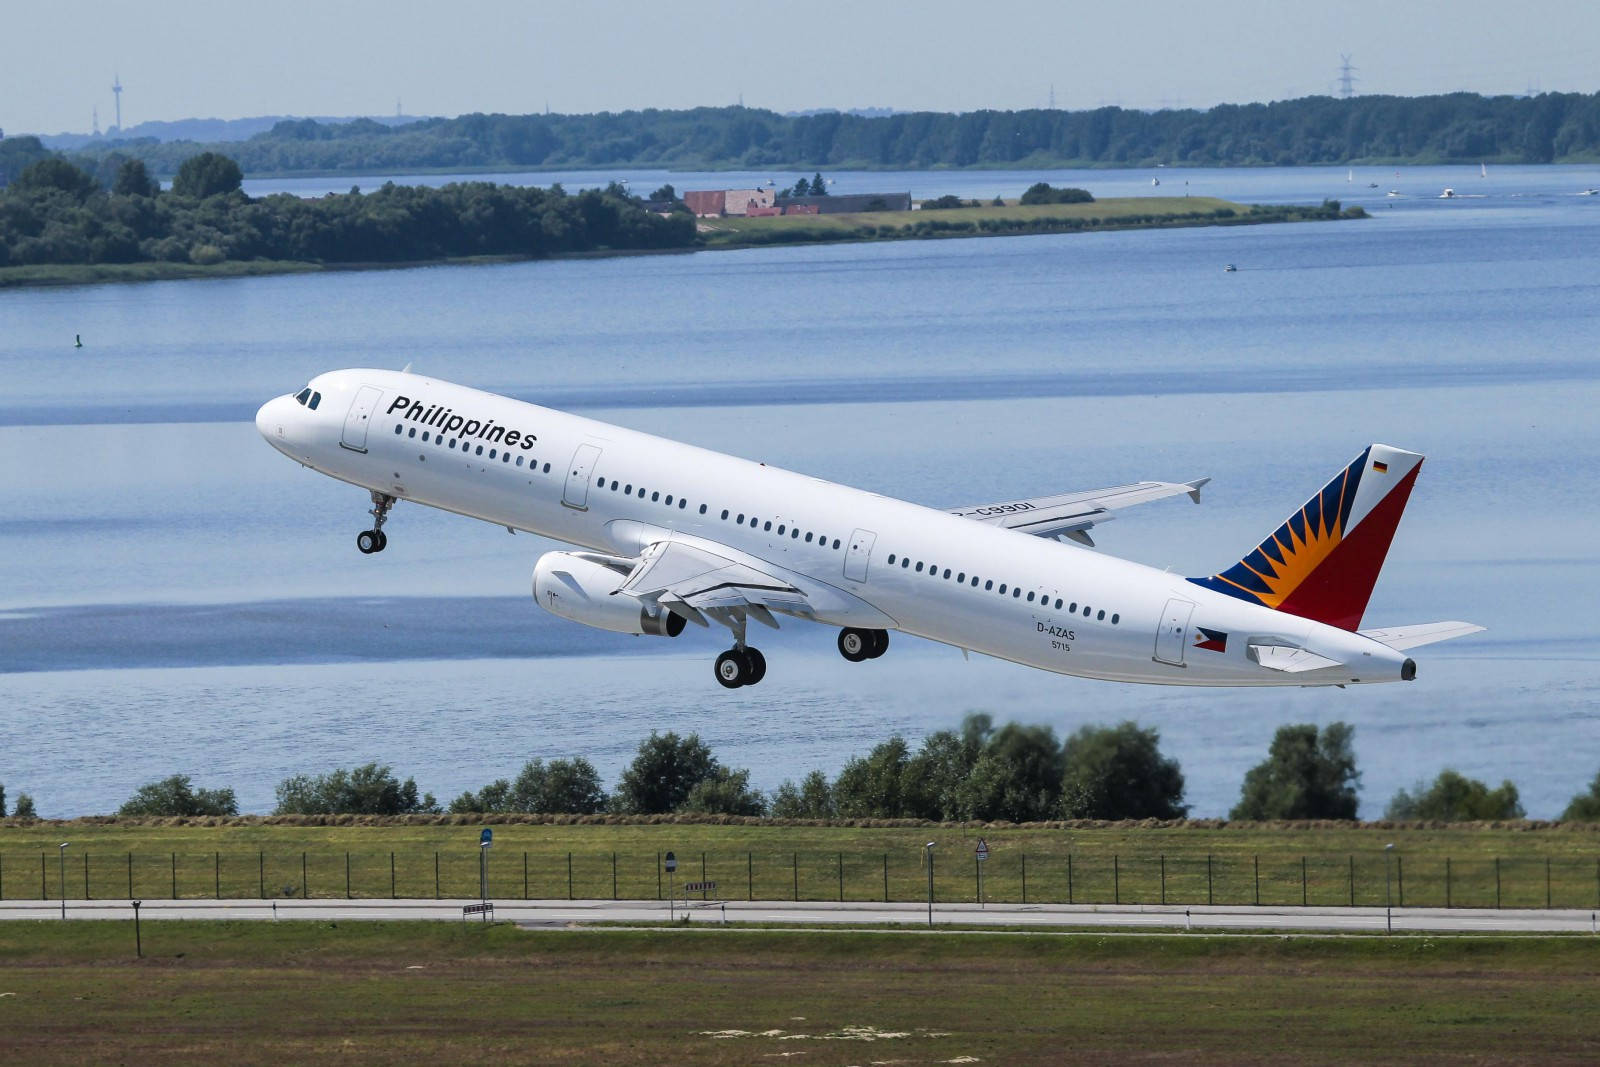 Philippine Airlines Plane Taking Off With Lake View Wallpaper